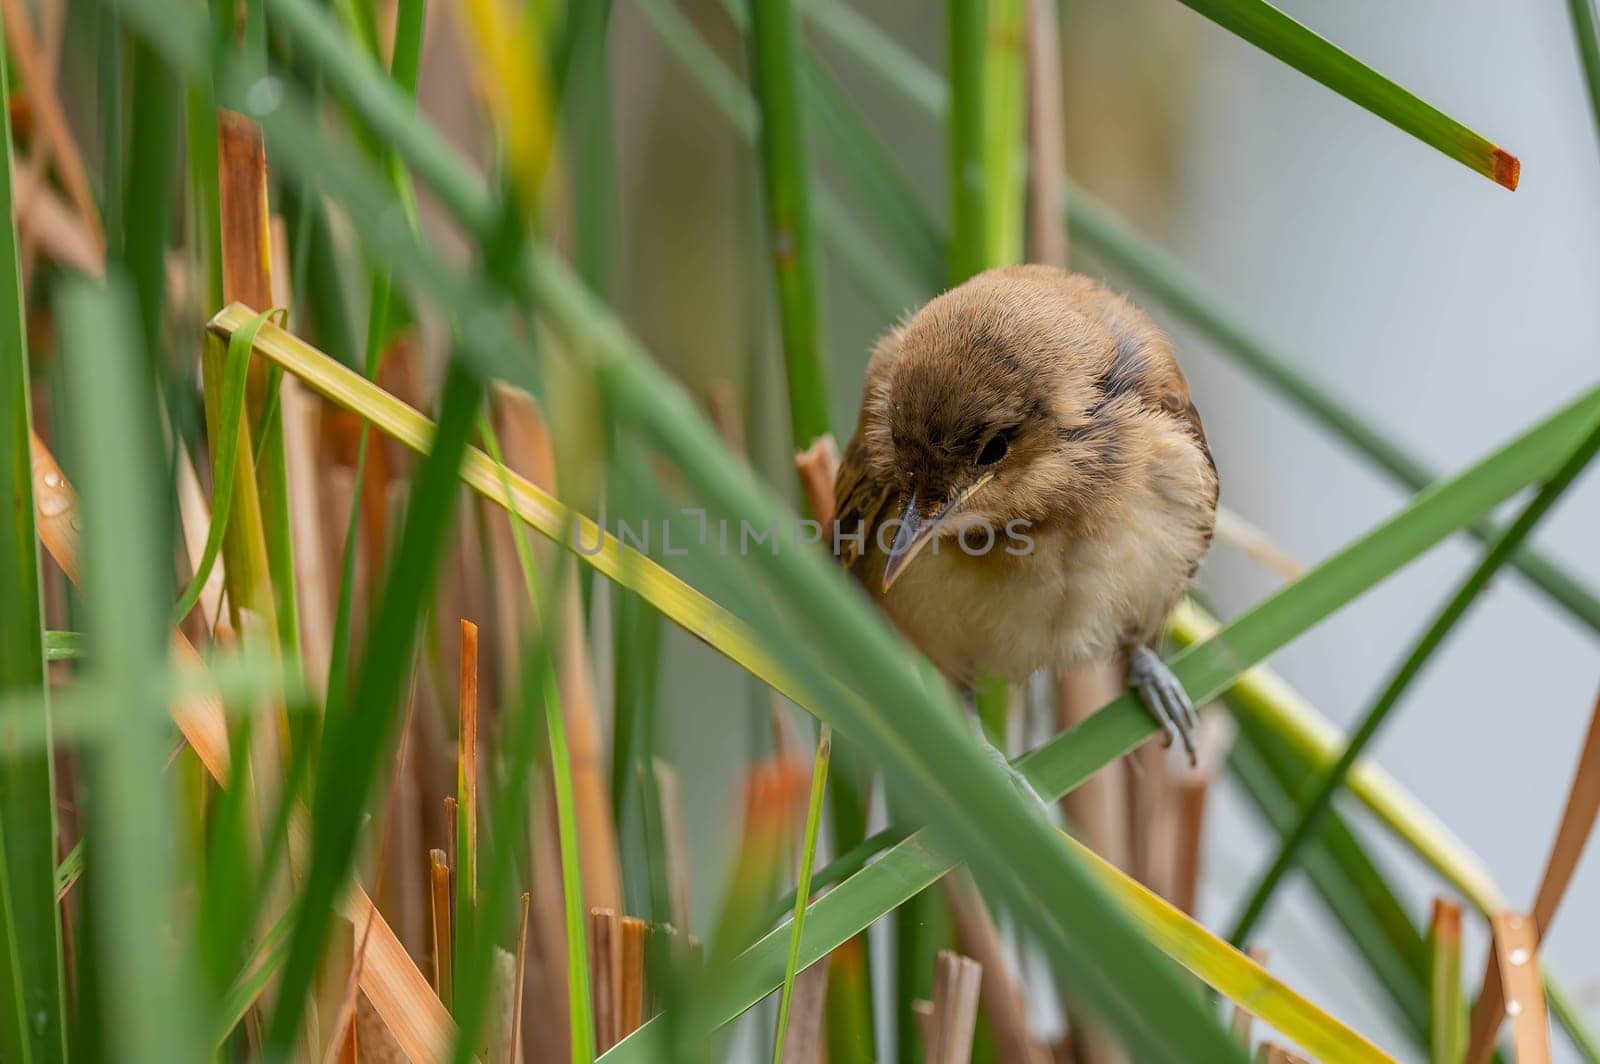 A Great Reed Warbler perched on the vibrant green grass, camouflaged amidst its natural surroundings.